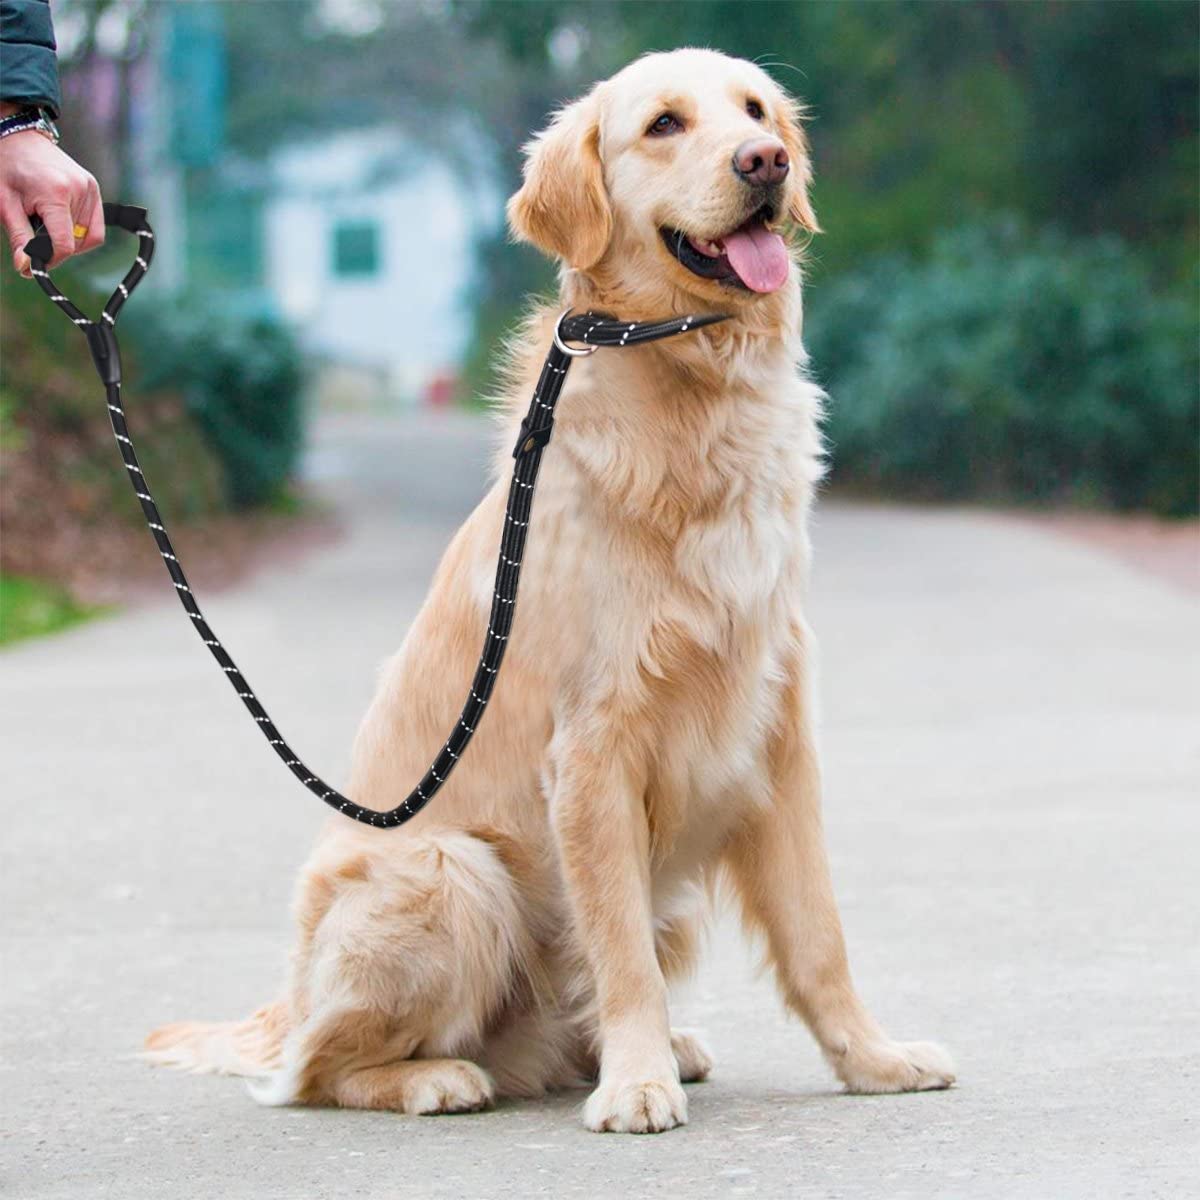 Can you use a slip lead on a dog that pulls?